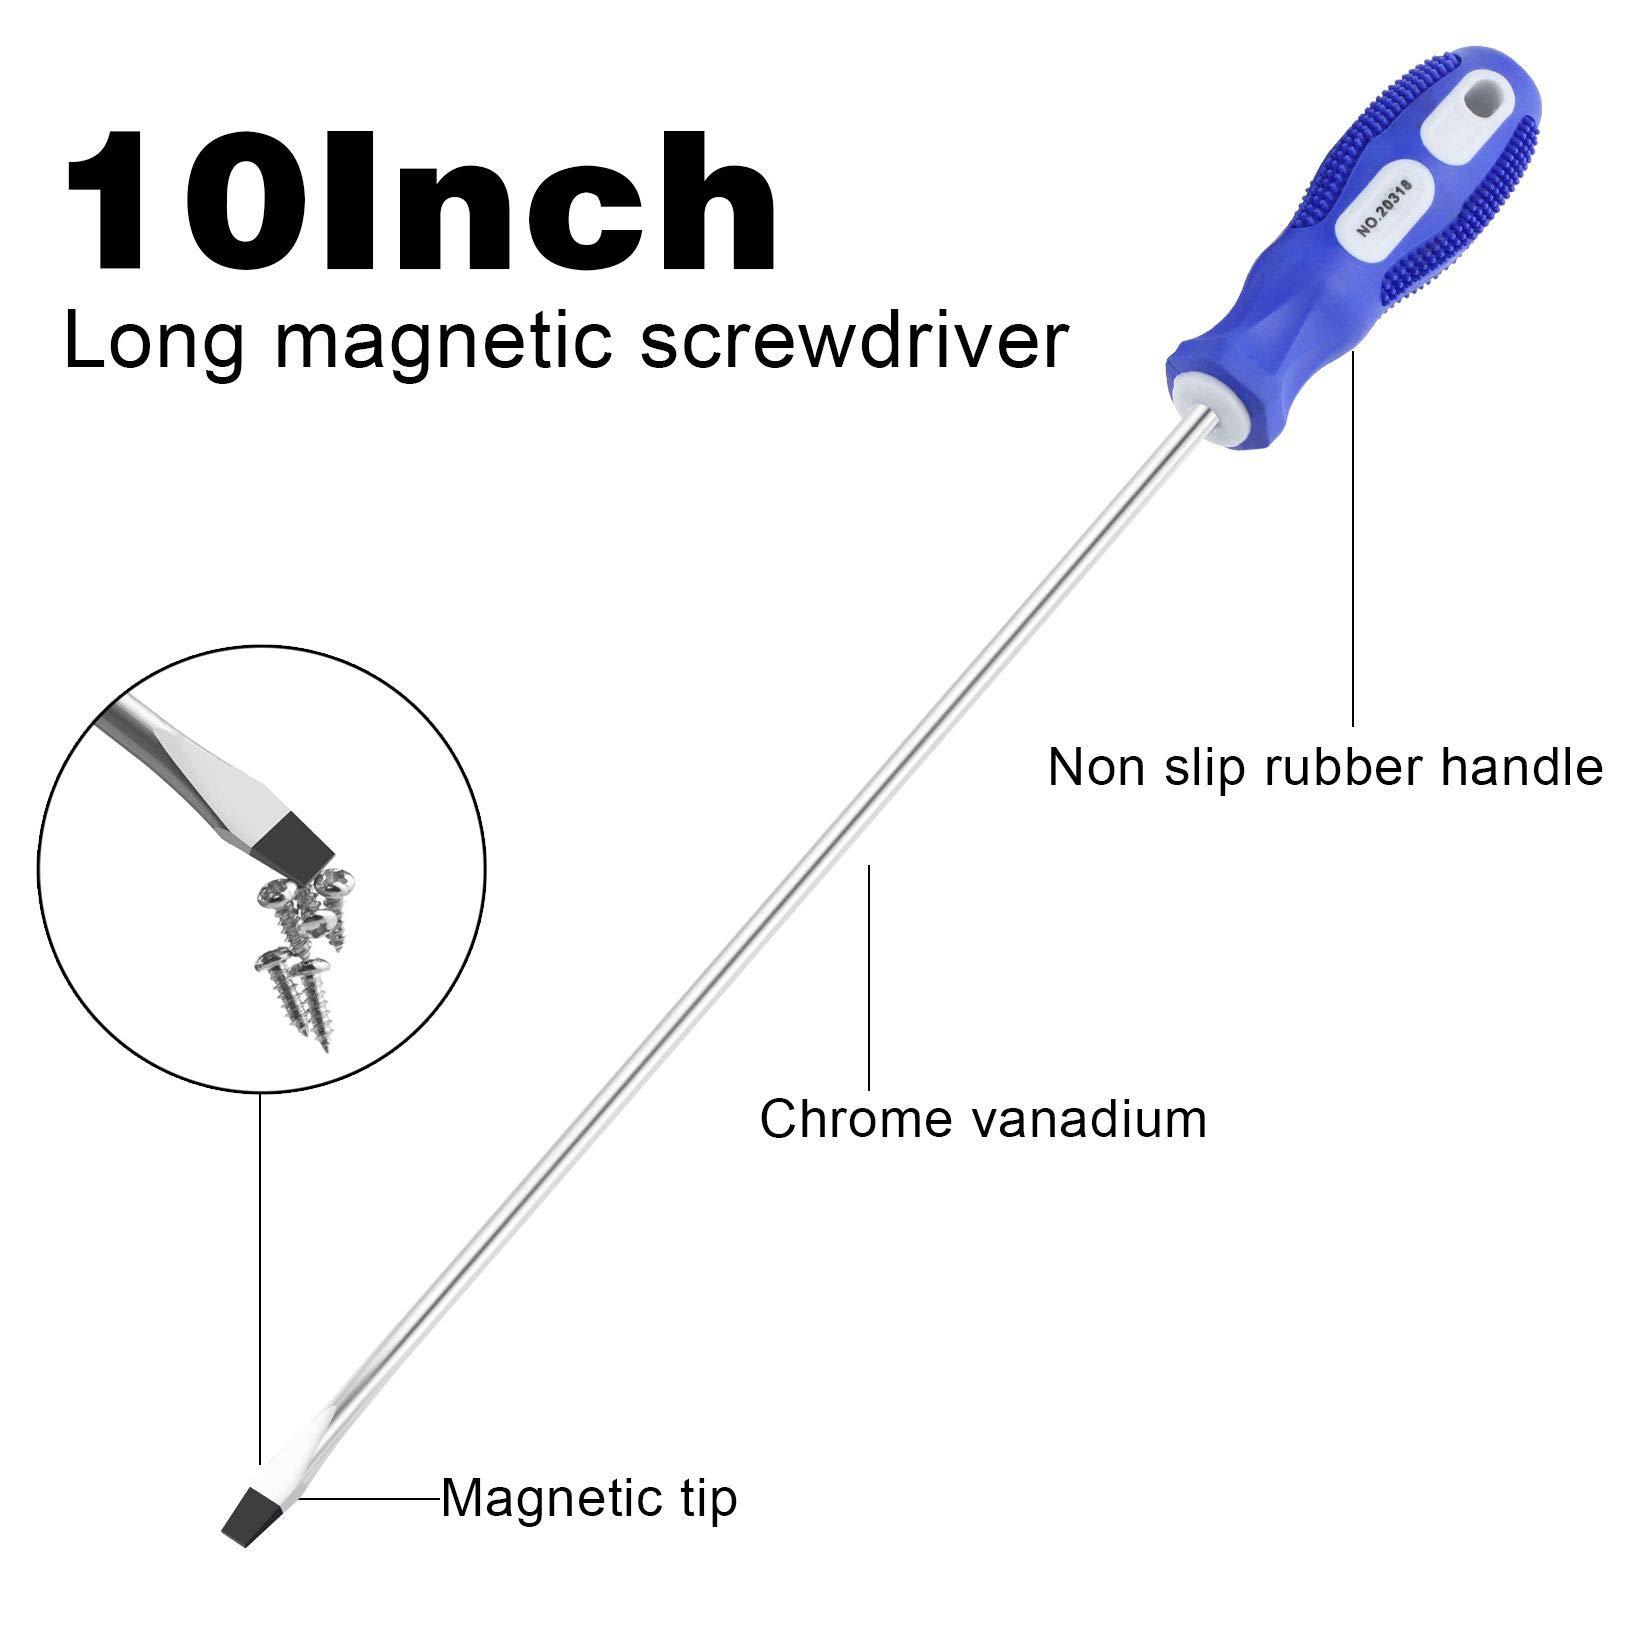 iebuobo 10-inch long screwdriver magnetic tip cross head flat head no.2 screwdriver 2 packs, with magnetizer/demagnetizer too